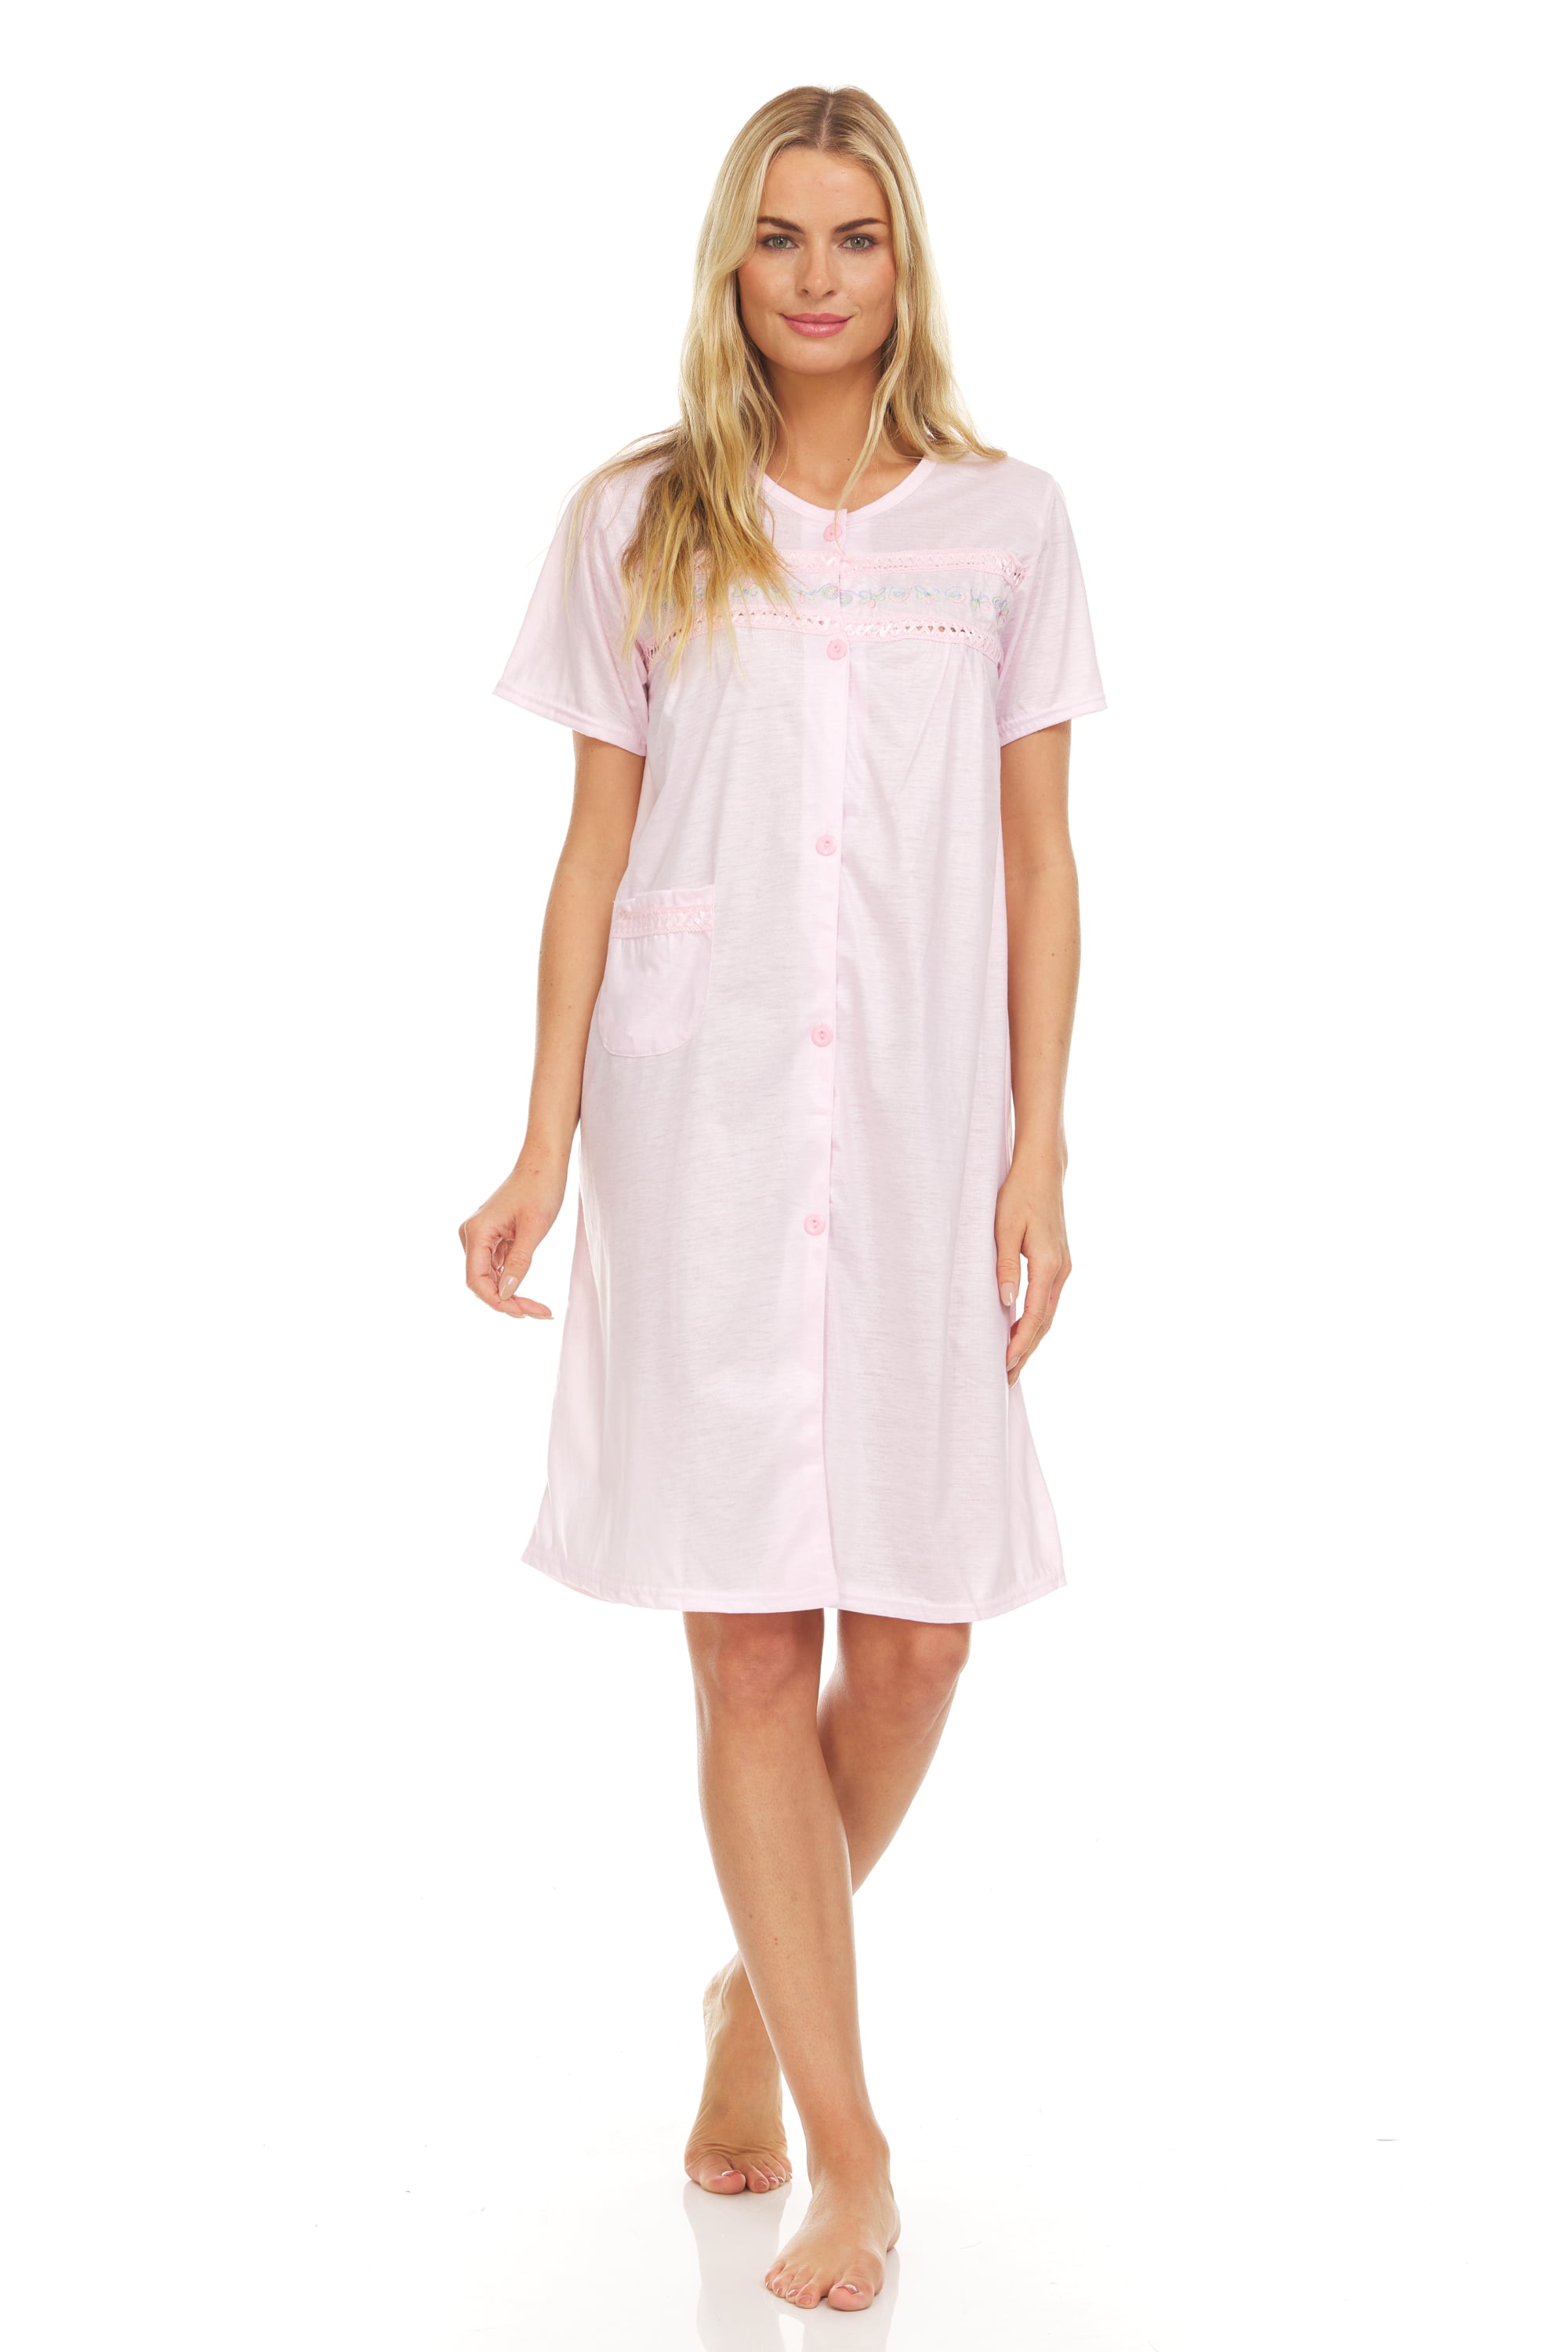 Ezi Womens Short Sleeve Cotton Rich Button Down Nightgown House Dress With Embroidery Detail